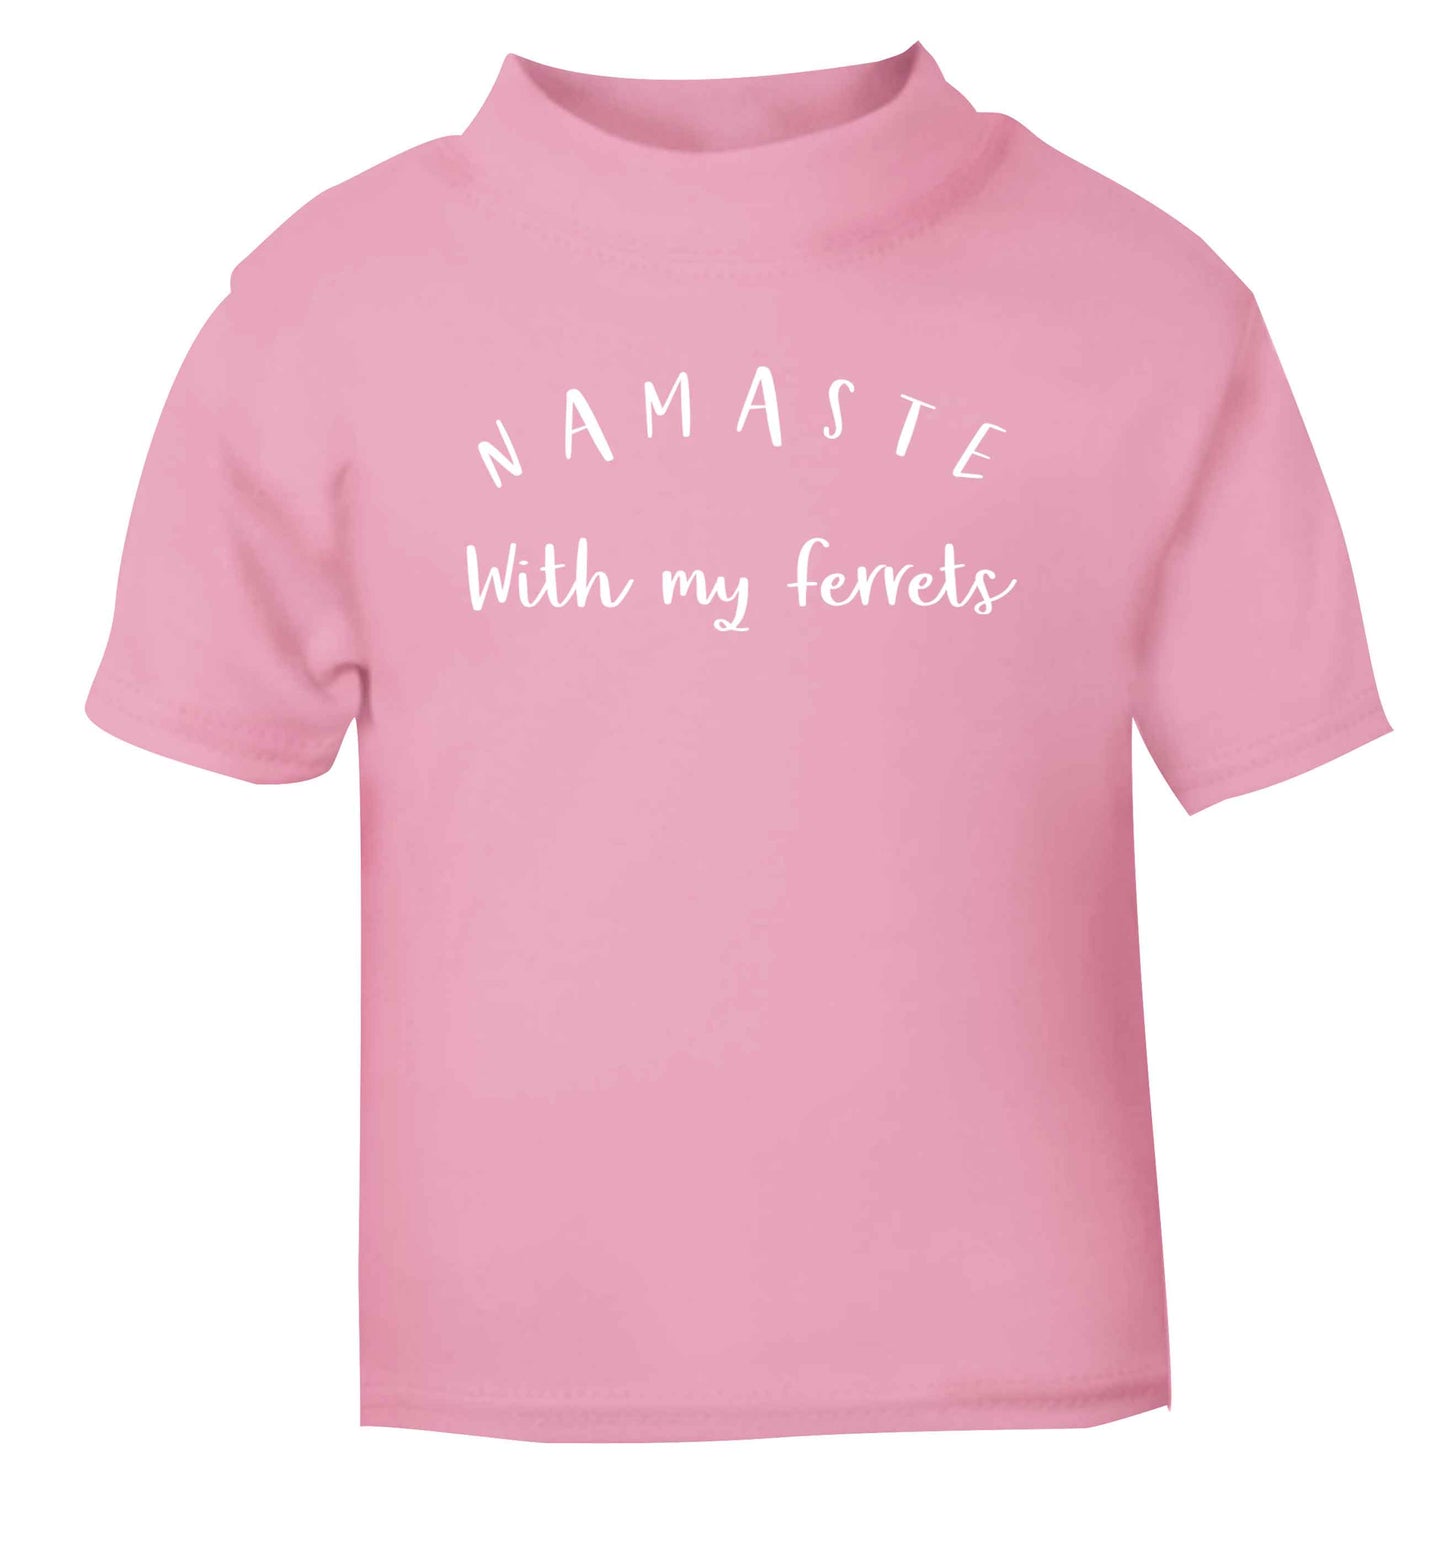 Namaste with my ferrets light pink Baby Toddler Tshirt 2 Years